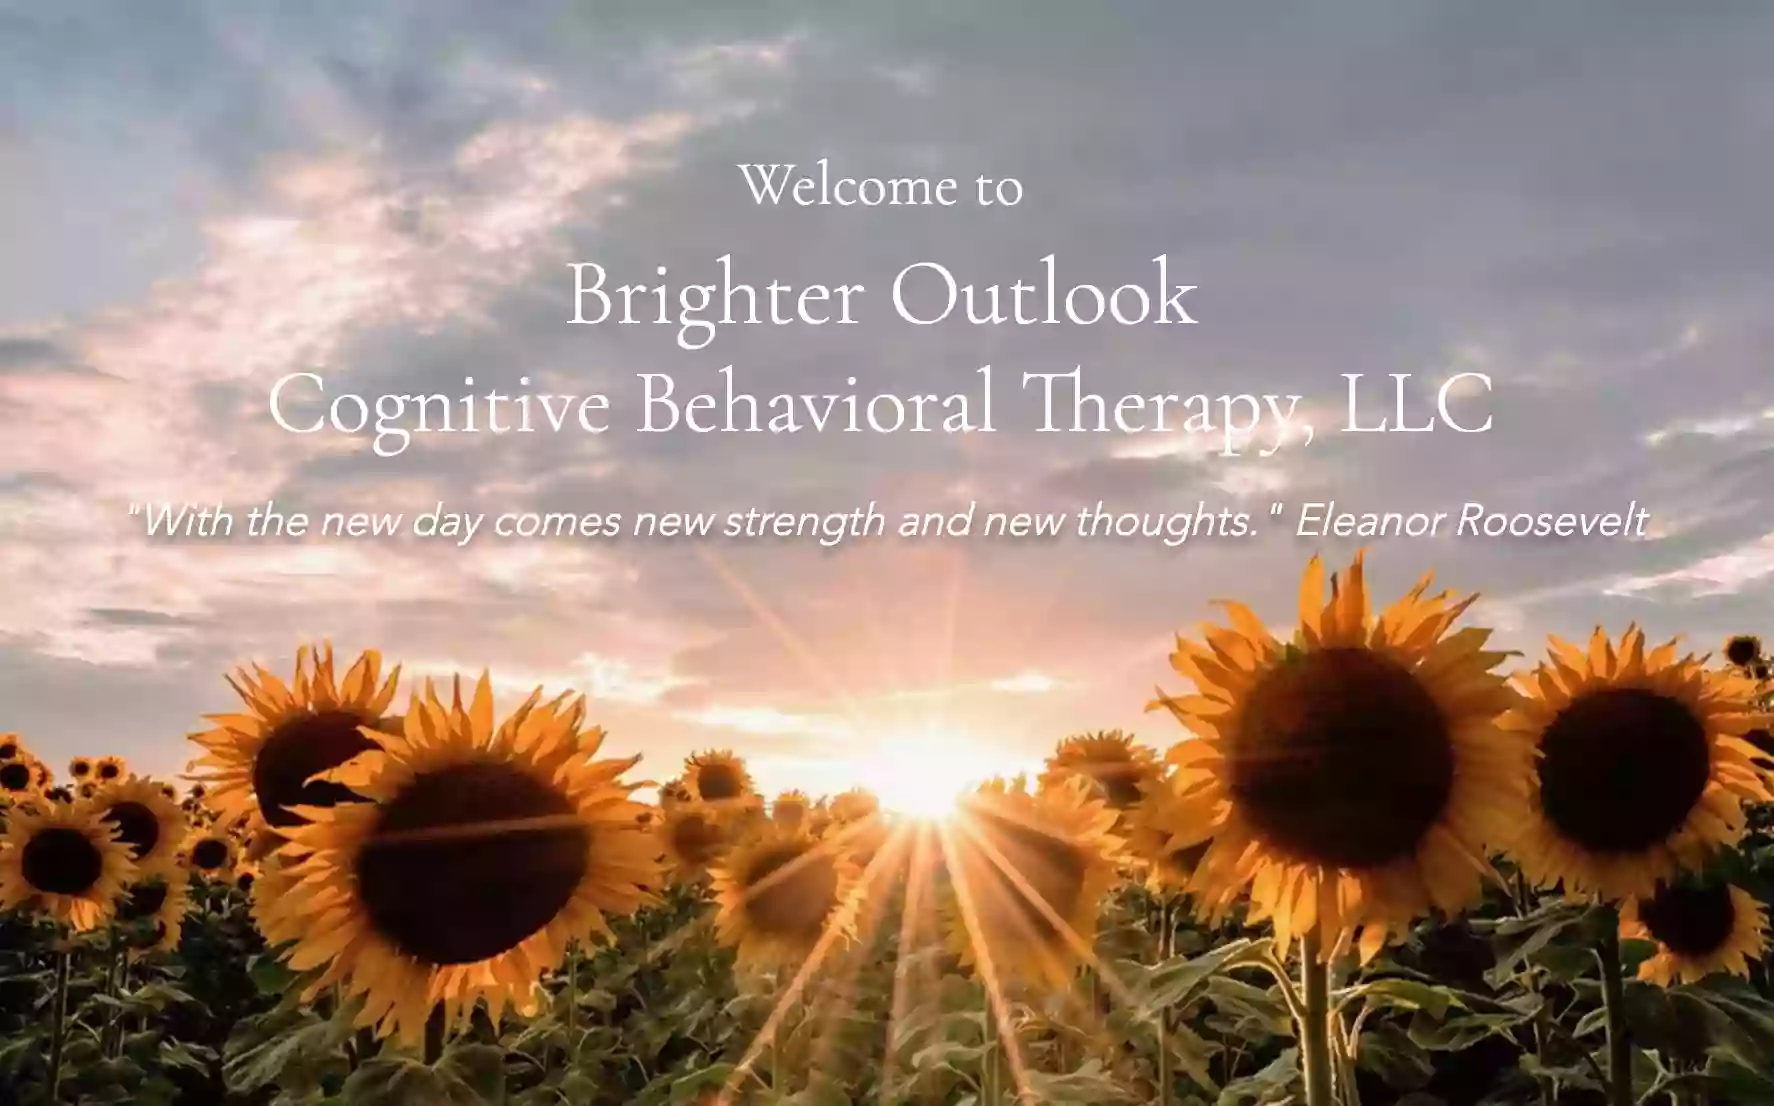 Brighter Outlook Cognitive Behavioral Therapy, LLC